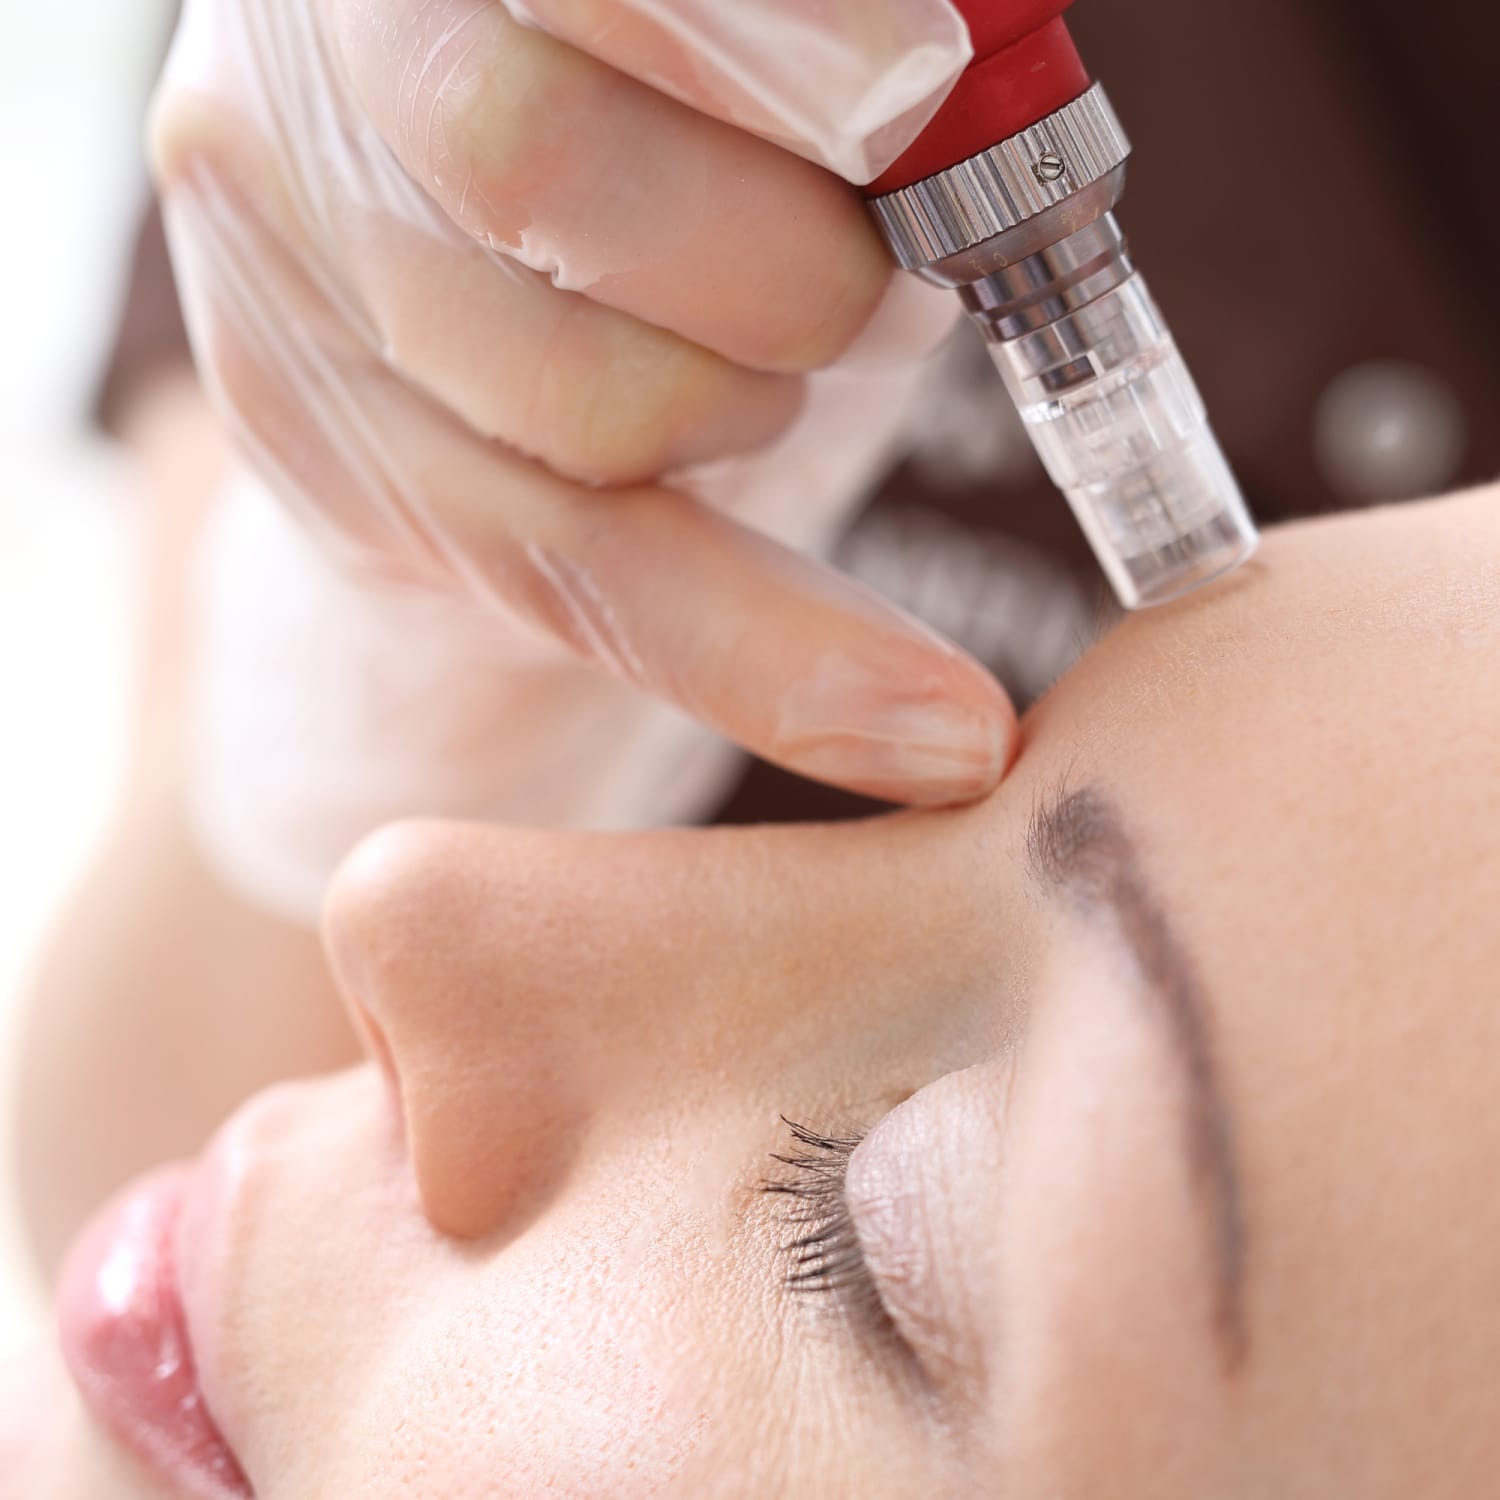 Microneedling Vs. Other Treatments